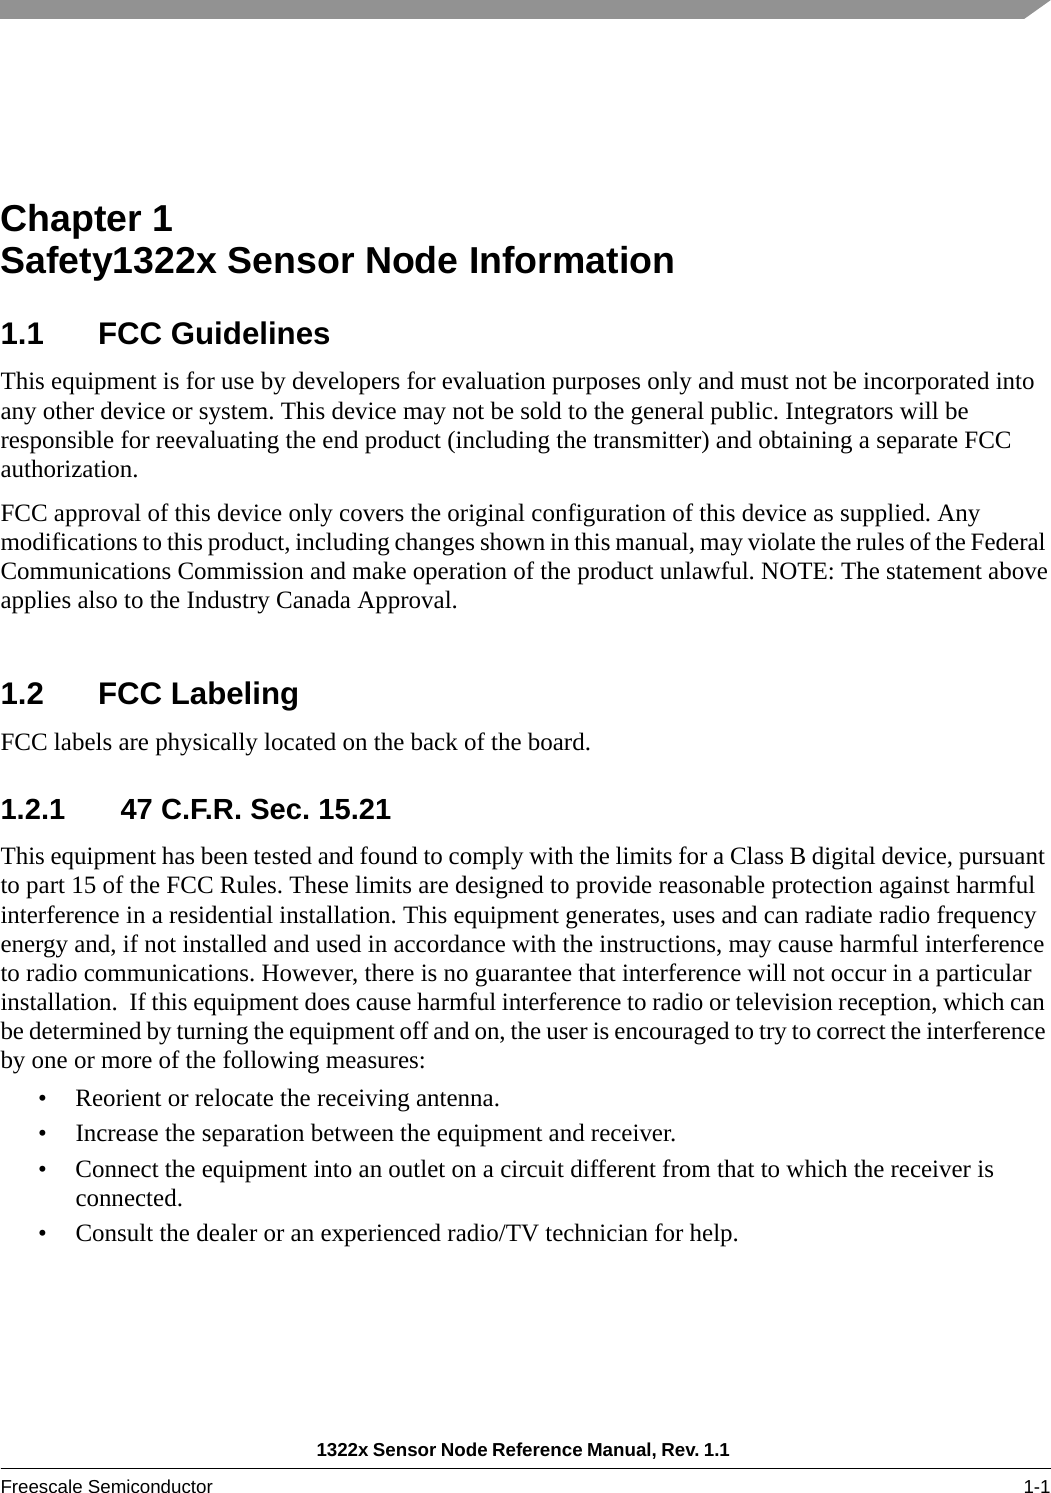 1322x Sensor Node Reference Manual, Rev. 1.1 Freescale Semiconductor 1-1Chapter 1  Safety1322x Sensor Node Information1.1 FCC GuidelinesThis equipment is for use by developers for evaluation purposes only and must not be incorporated into any other device or system. This device may not be sold to the general public. Integrators will be responsible for reevaluating the end product (including the transmitter) and obtaining a separate FCC authorization.FCC approval of this device only covers the original configuration of this device as supplied. Any modifications to this product, including changes shown in this manual, may violate the rules of the Federal Communications Commission and make operation of the product unlawful. NOTE: The statement aboveapplies also to the Industry Canada Approval.  1.2 FCC LabelingFCC labels are physically located on the back of the board.1.2.1 47 C.F.R. Sec. 15.21This equipment has been tested and found to comply with the limits for a Class B digital device, pursuant to part 15 of the FCC Rules. These limits are designed to provide reasonable protection against harmful interference in a residential installation. This equipment generates, uses and can radiate radio frequency energy and, if not installed and used in accordance with the instructions, may cause harmful interference to radio communications. However, there is no guarantee that interference will not occur in a particular installation.  If this equipment does cause harmful interference to radio or television reception, which can be determined by turning the equipment off and on, the user is encouraged to try to correct the interference by one or more of the following measures:• Reorient or relocate the receiving antenna.• Increase the separation between the equipment and receiver.• Connect the equipment into an outlet on a circuit different from that to which the receiver is connected.• Consult the dealer or an experienced radio/TV technician for help.